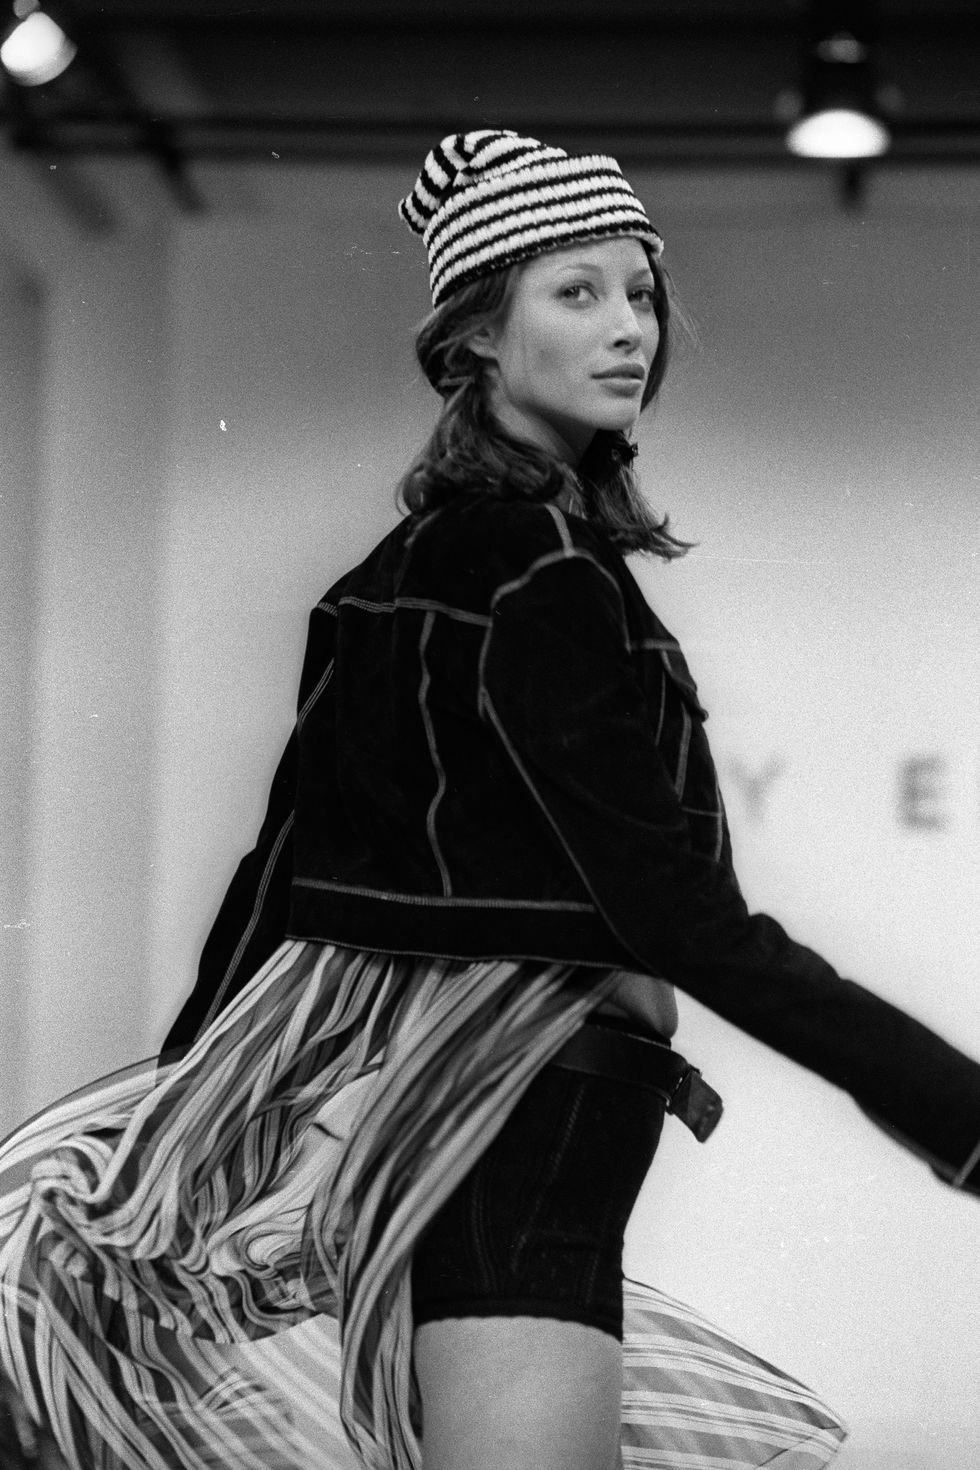 Christy Turlington on the Marc Jacobs catwalk in 1992